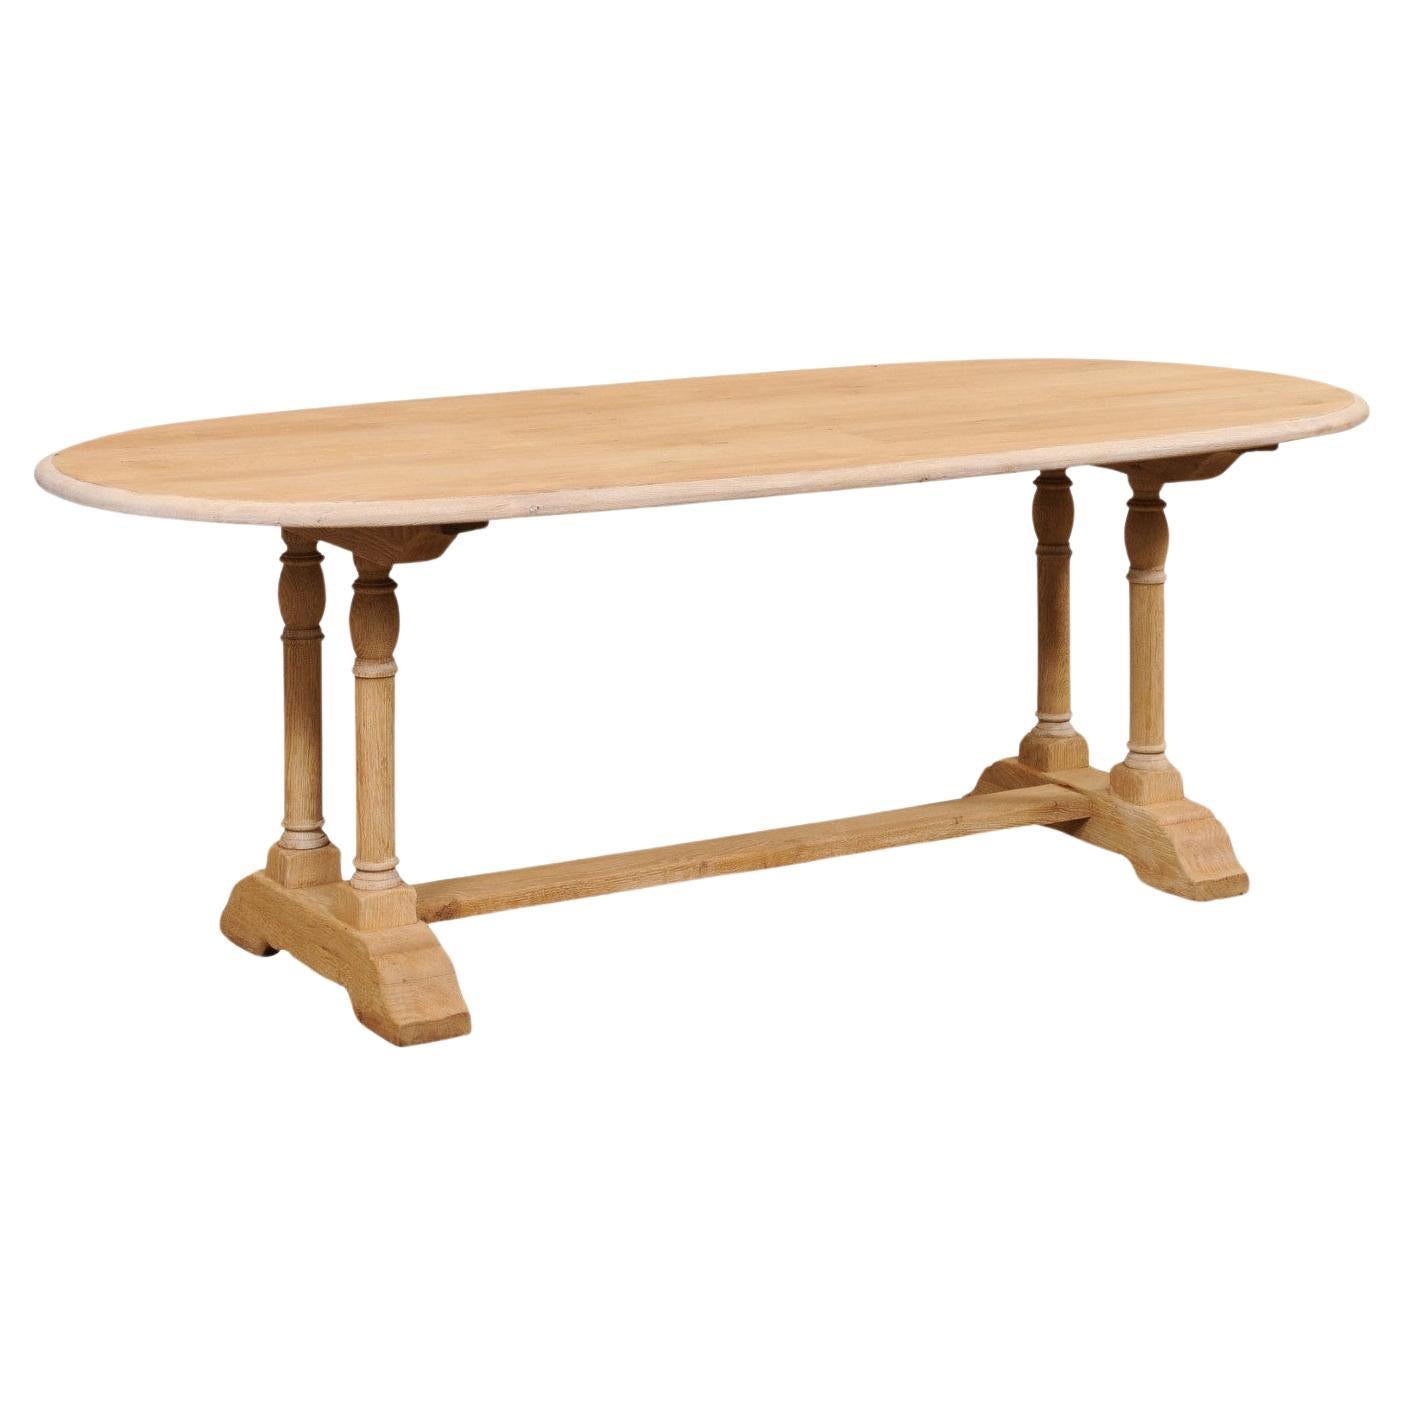 A French Oval-Shaped Bleached Wood Trestle Dining Table, Mid 20th Century